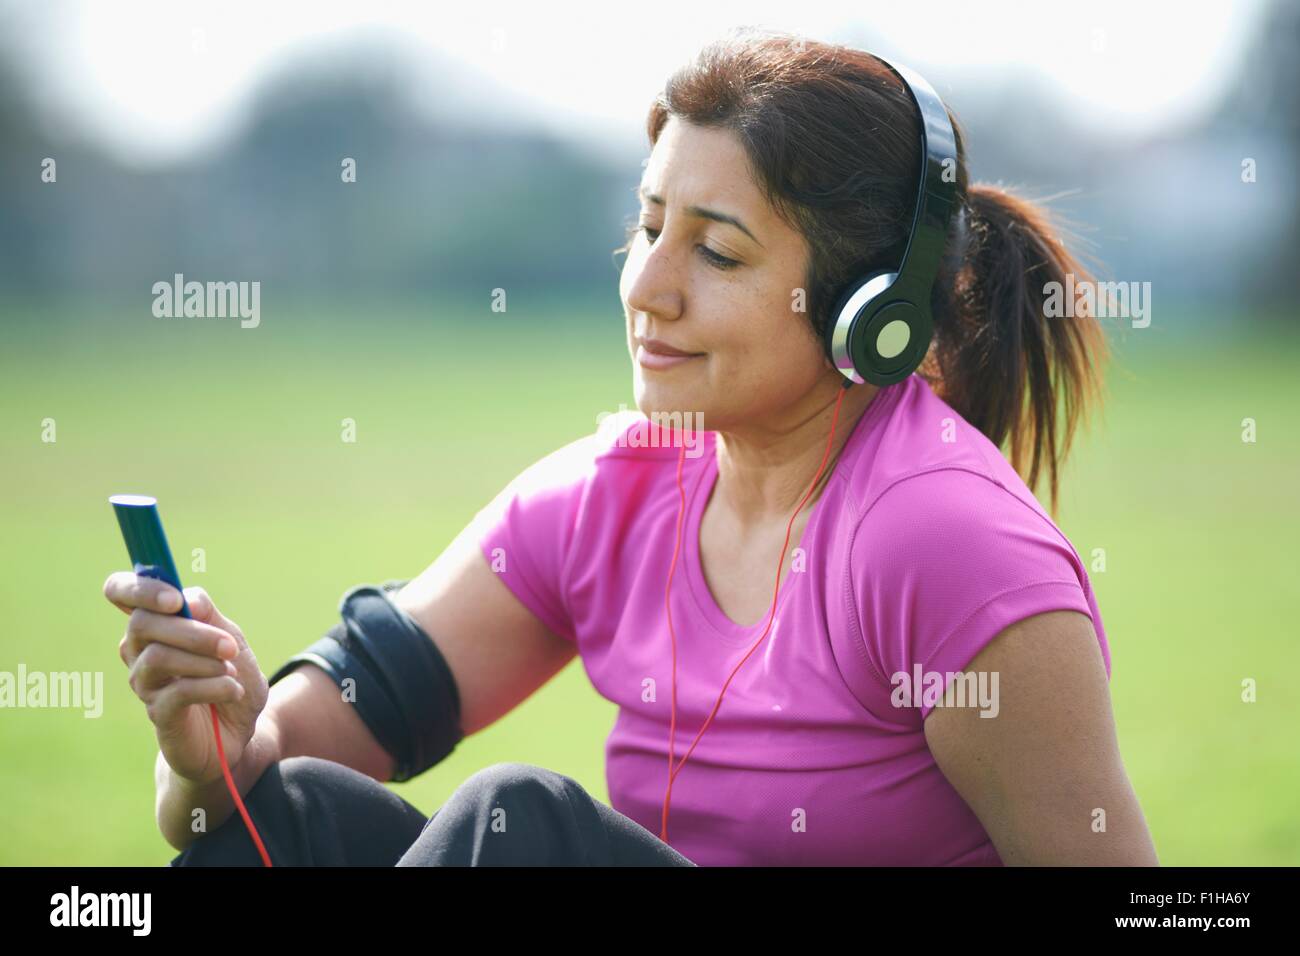 Mature woman taking exercise break in park selecting music from MP3 player Stock Photo